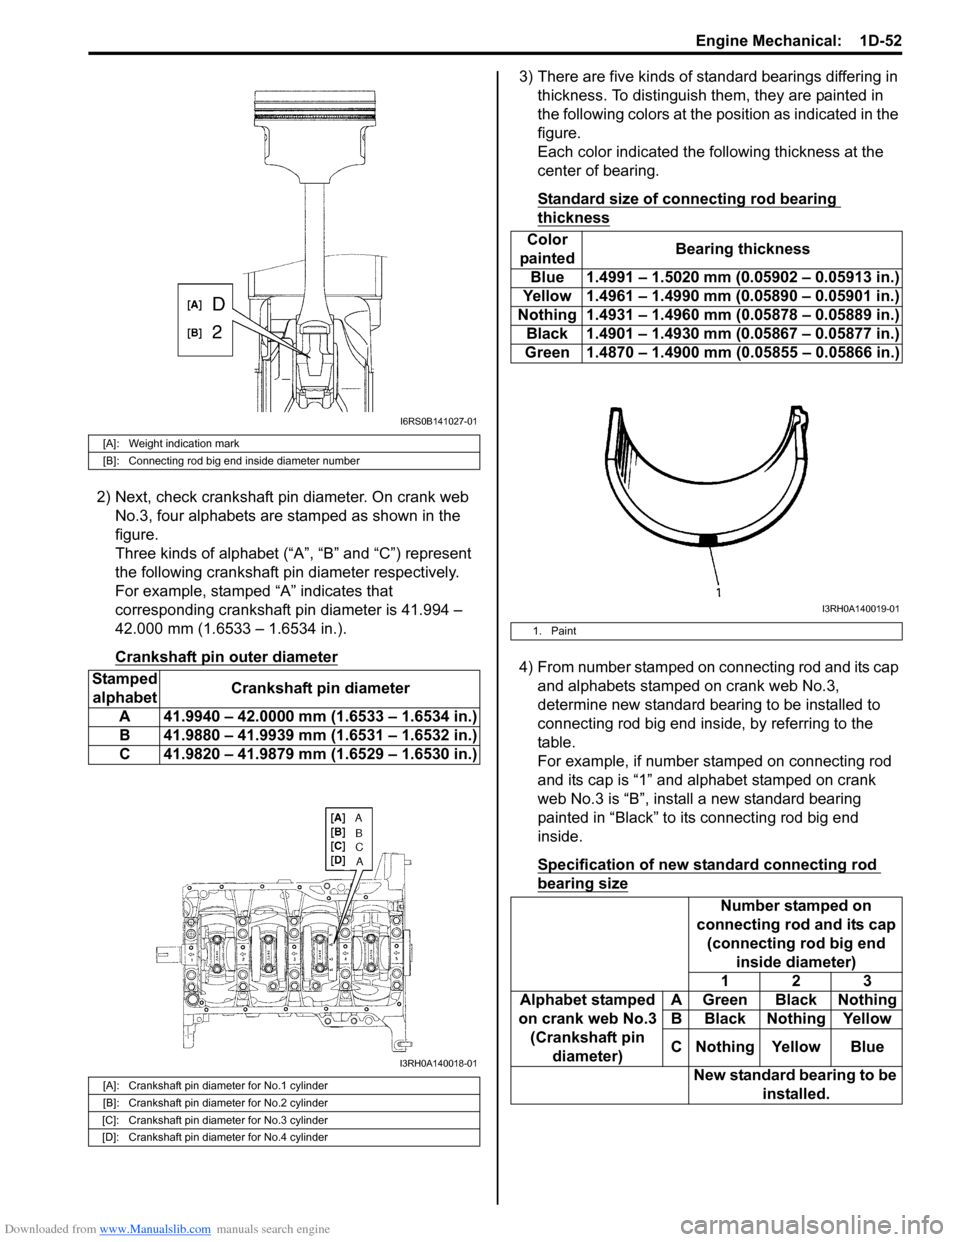 SUZUKI SWIFT 2008 2.G Service Workshop Manual Downloaded from www.Manualslib.com manuals search engine Engine Mechanical:  1D-52
2) Next, check crankshaft pin diameter. On crank web No.3, four alphabets are stamped as shown in the 
figure.
Three 